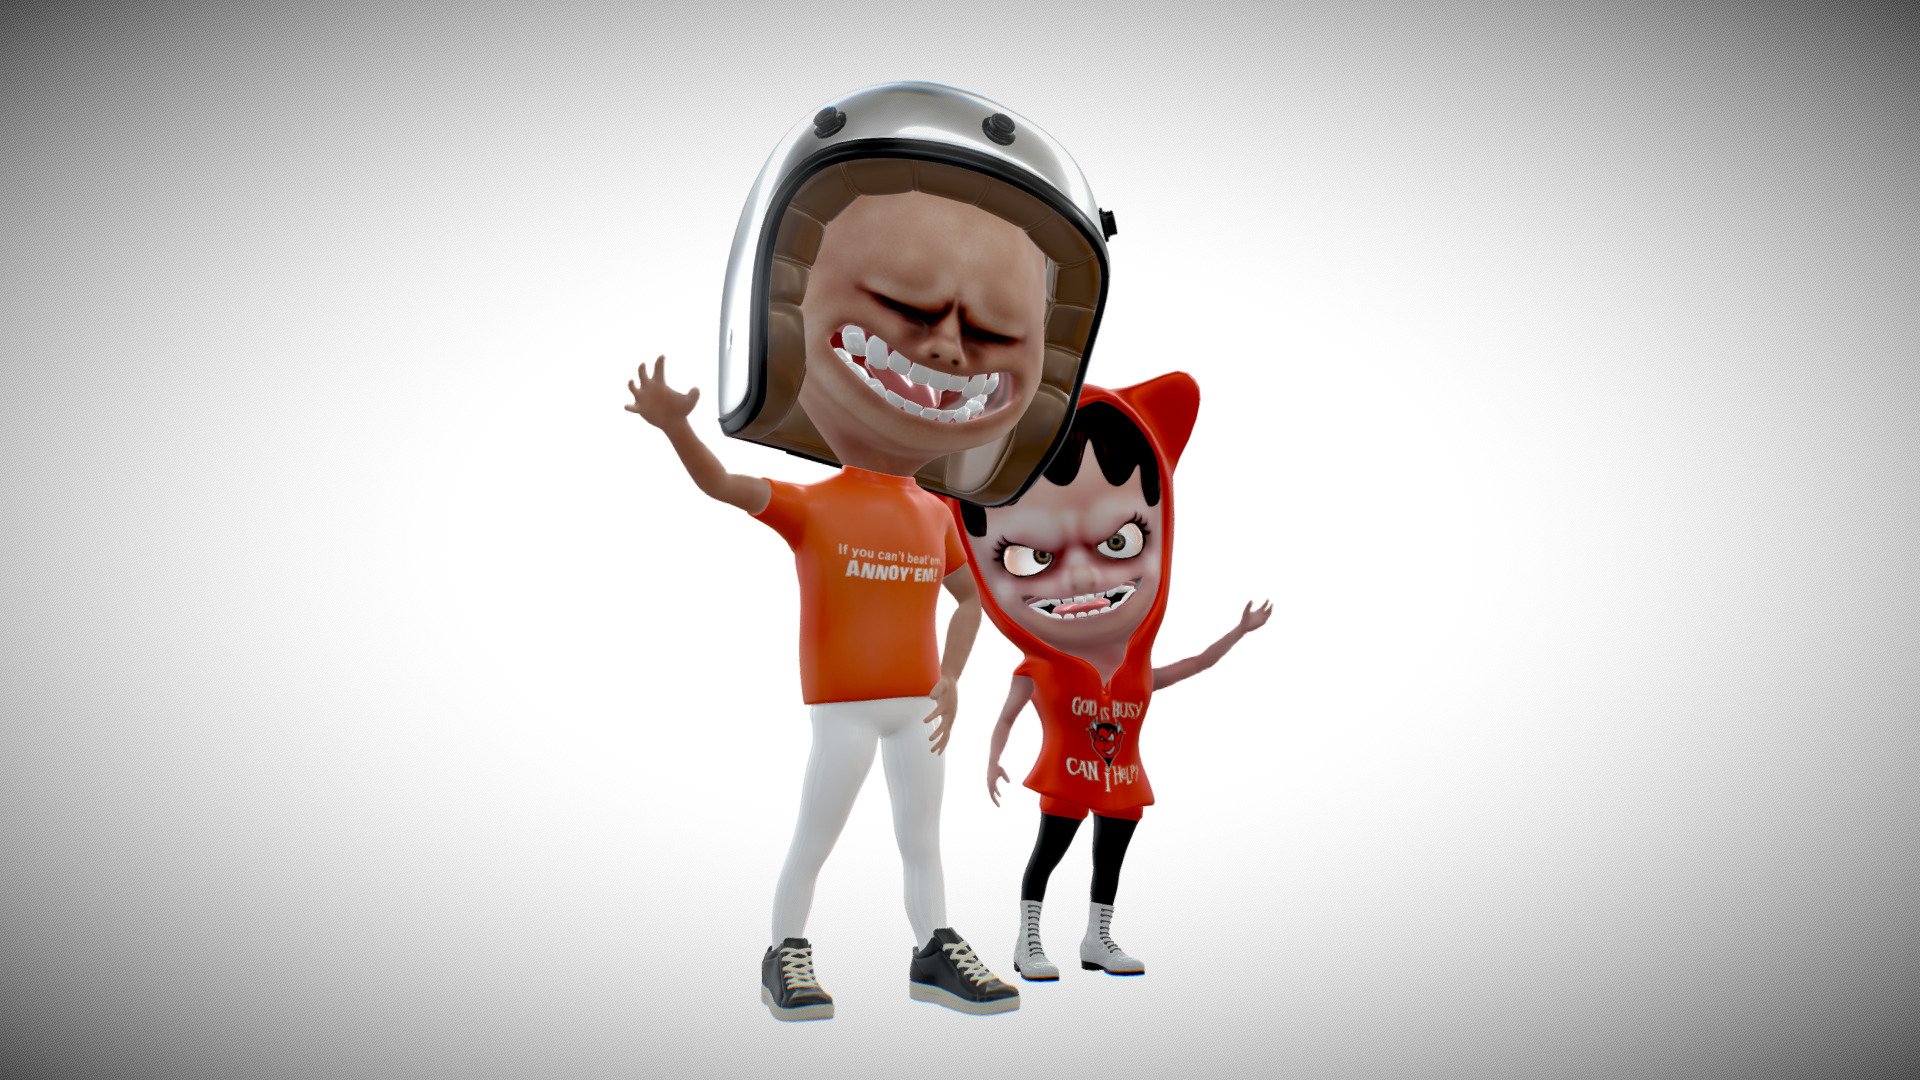 https://www.youtube.com/watch?v=IScT0irgNhg - THE UGLY KIDS SHOW - 3D model by projectblank 3d model